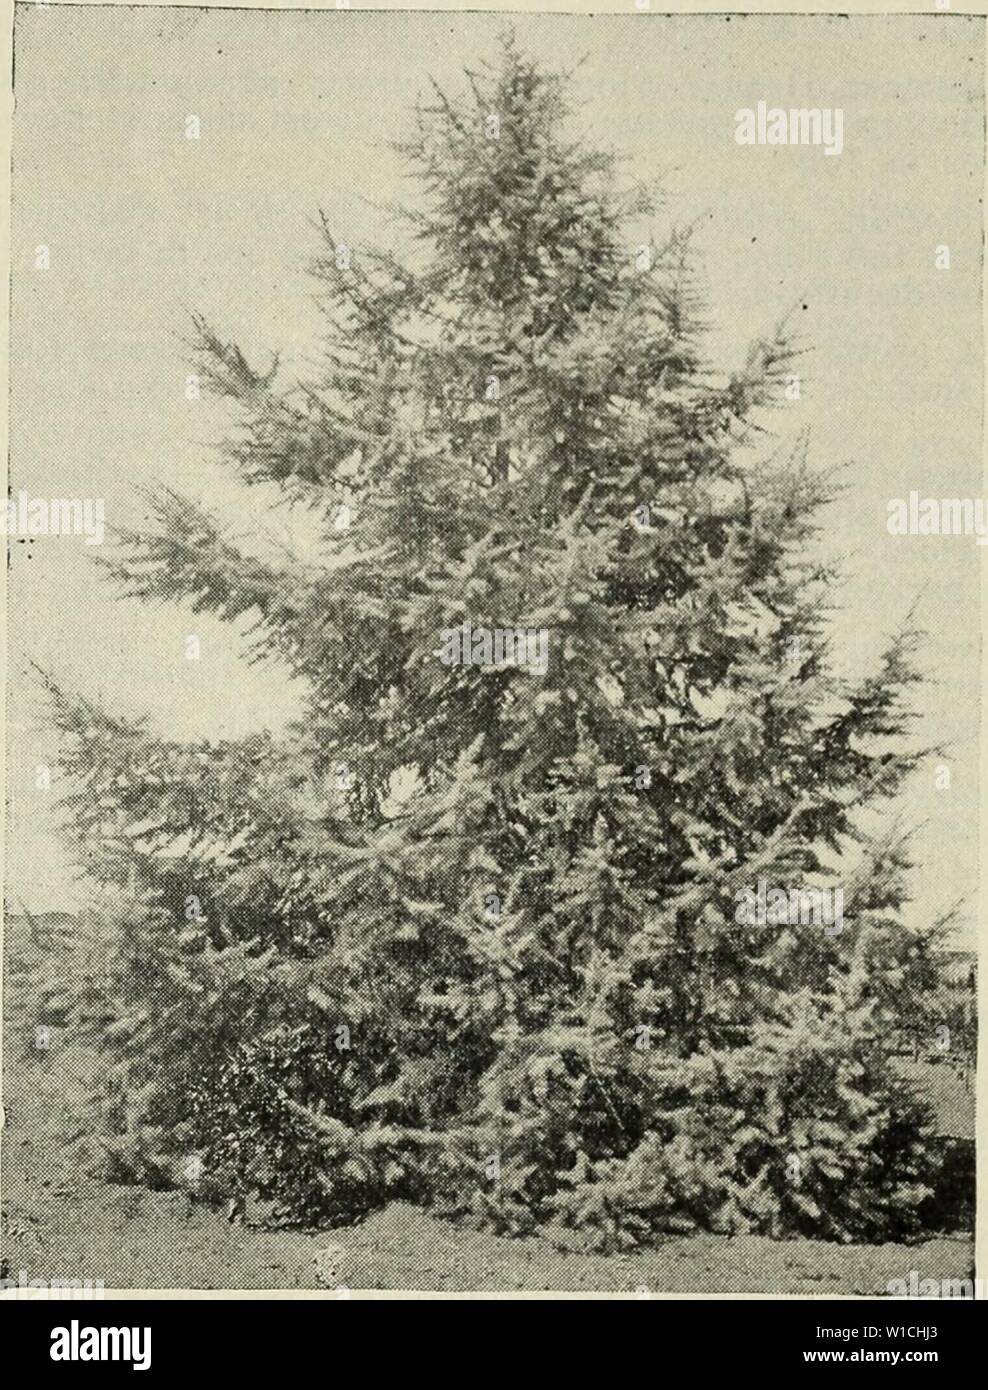 Archive image from page 66 of Descriptive catalogue of deciduous fruit. Descriptive catalogue of deciduous fruit trees, citrus trees, olive trees, and grape vines : ornamental trees, shrubs and roses . descriptivecatal1902fanc Year: 1902  Fancher Creek Nurseries 63    CEDAR ATlyANTlCA Aucuba, japonica—A very handsome shrub, and one of the best of the colored leaved foli- age plants; leaves large, distinctly speckled with golden yellow. Should be grown in partial shade. Berberis, canadenis—A native species, with handsome, distinct foliage and yellow flow- ers, succeeded by red berries. purpurea Stock Photo